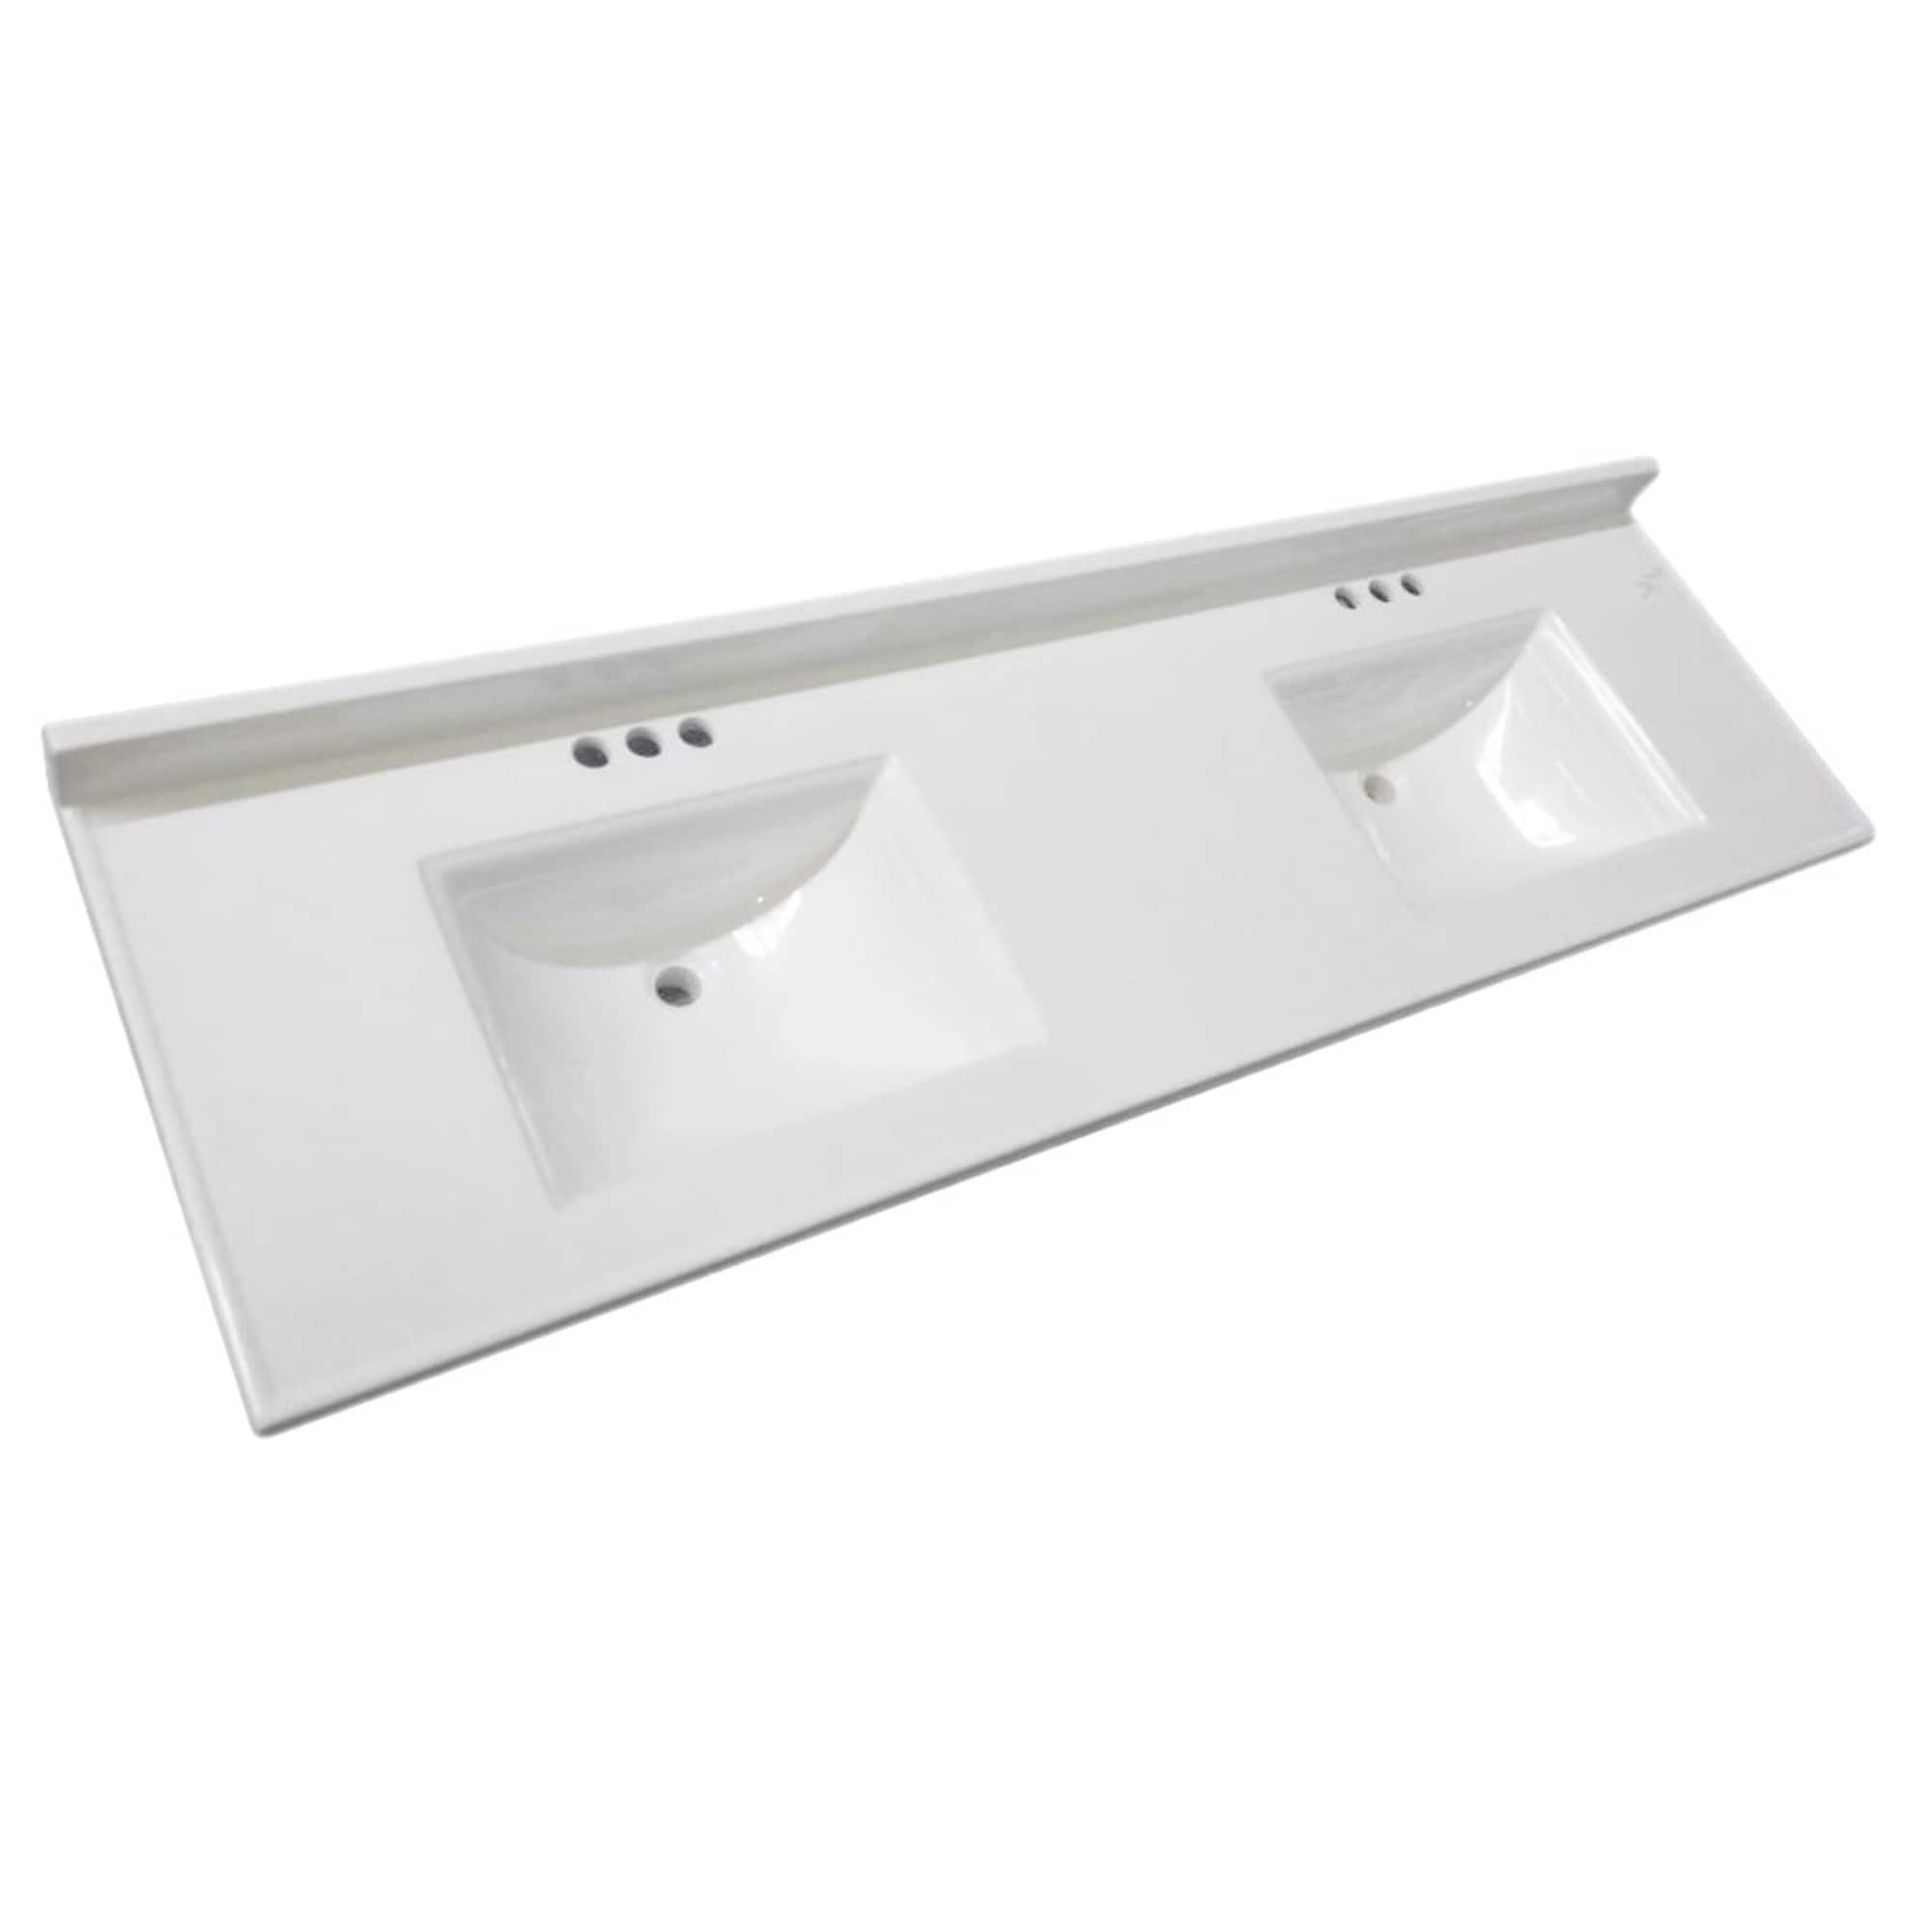 Camilla Bathroom Vanity Tops At Com, Camilla 25 In Cultured Marble Vanity Top Solid White With Basin